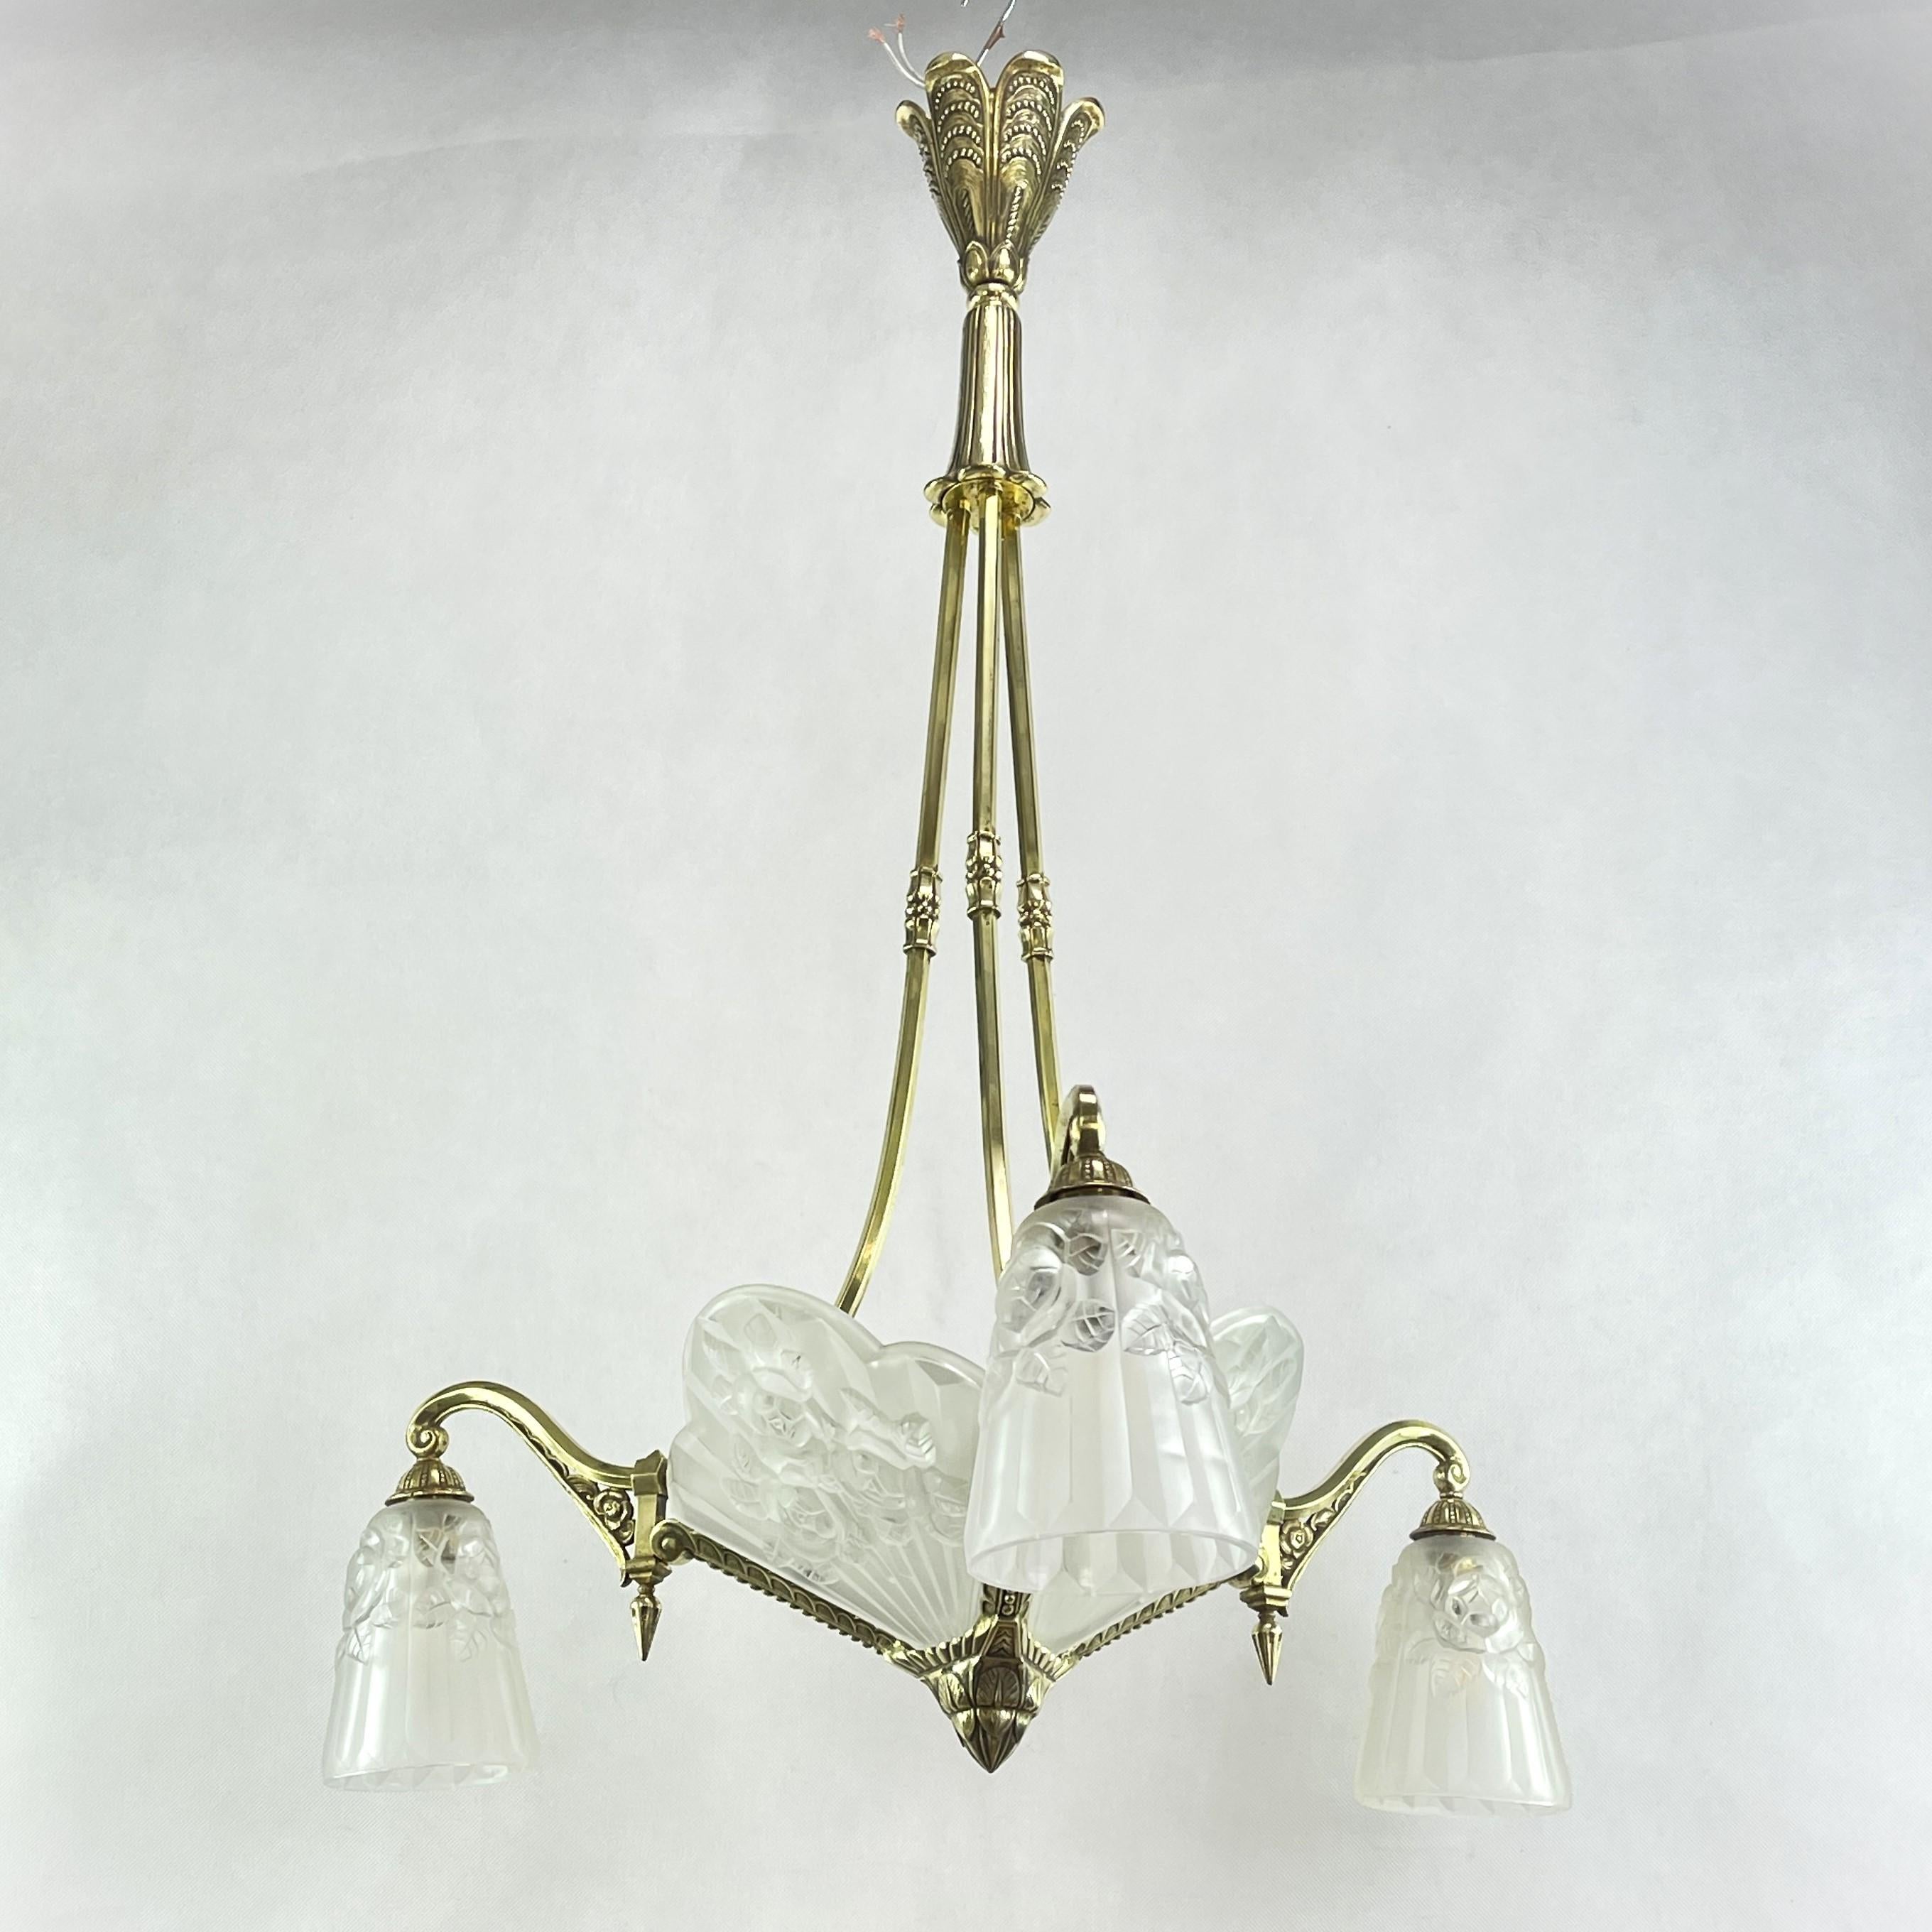 Early 20th Century Art Deco Chandelier Hanging Lamp by P. Gilles Paris, 1930s